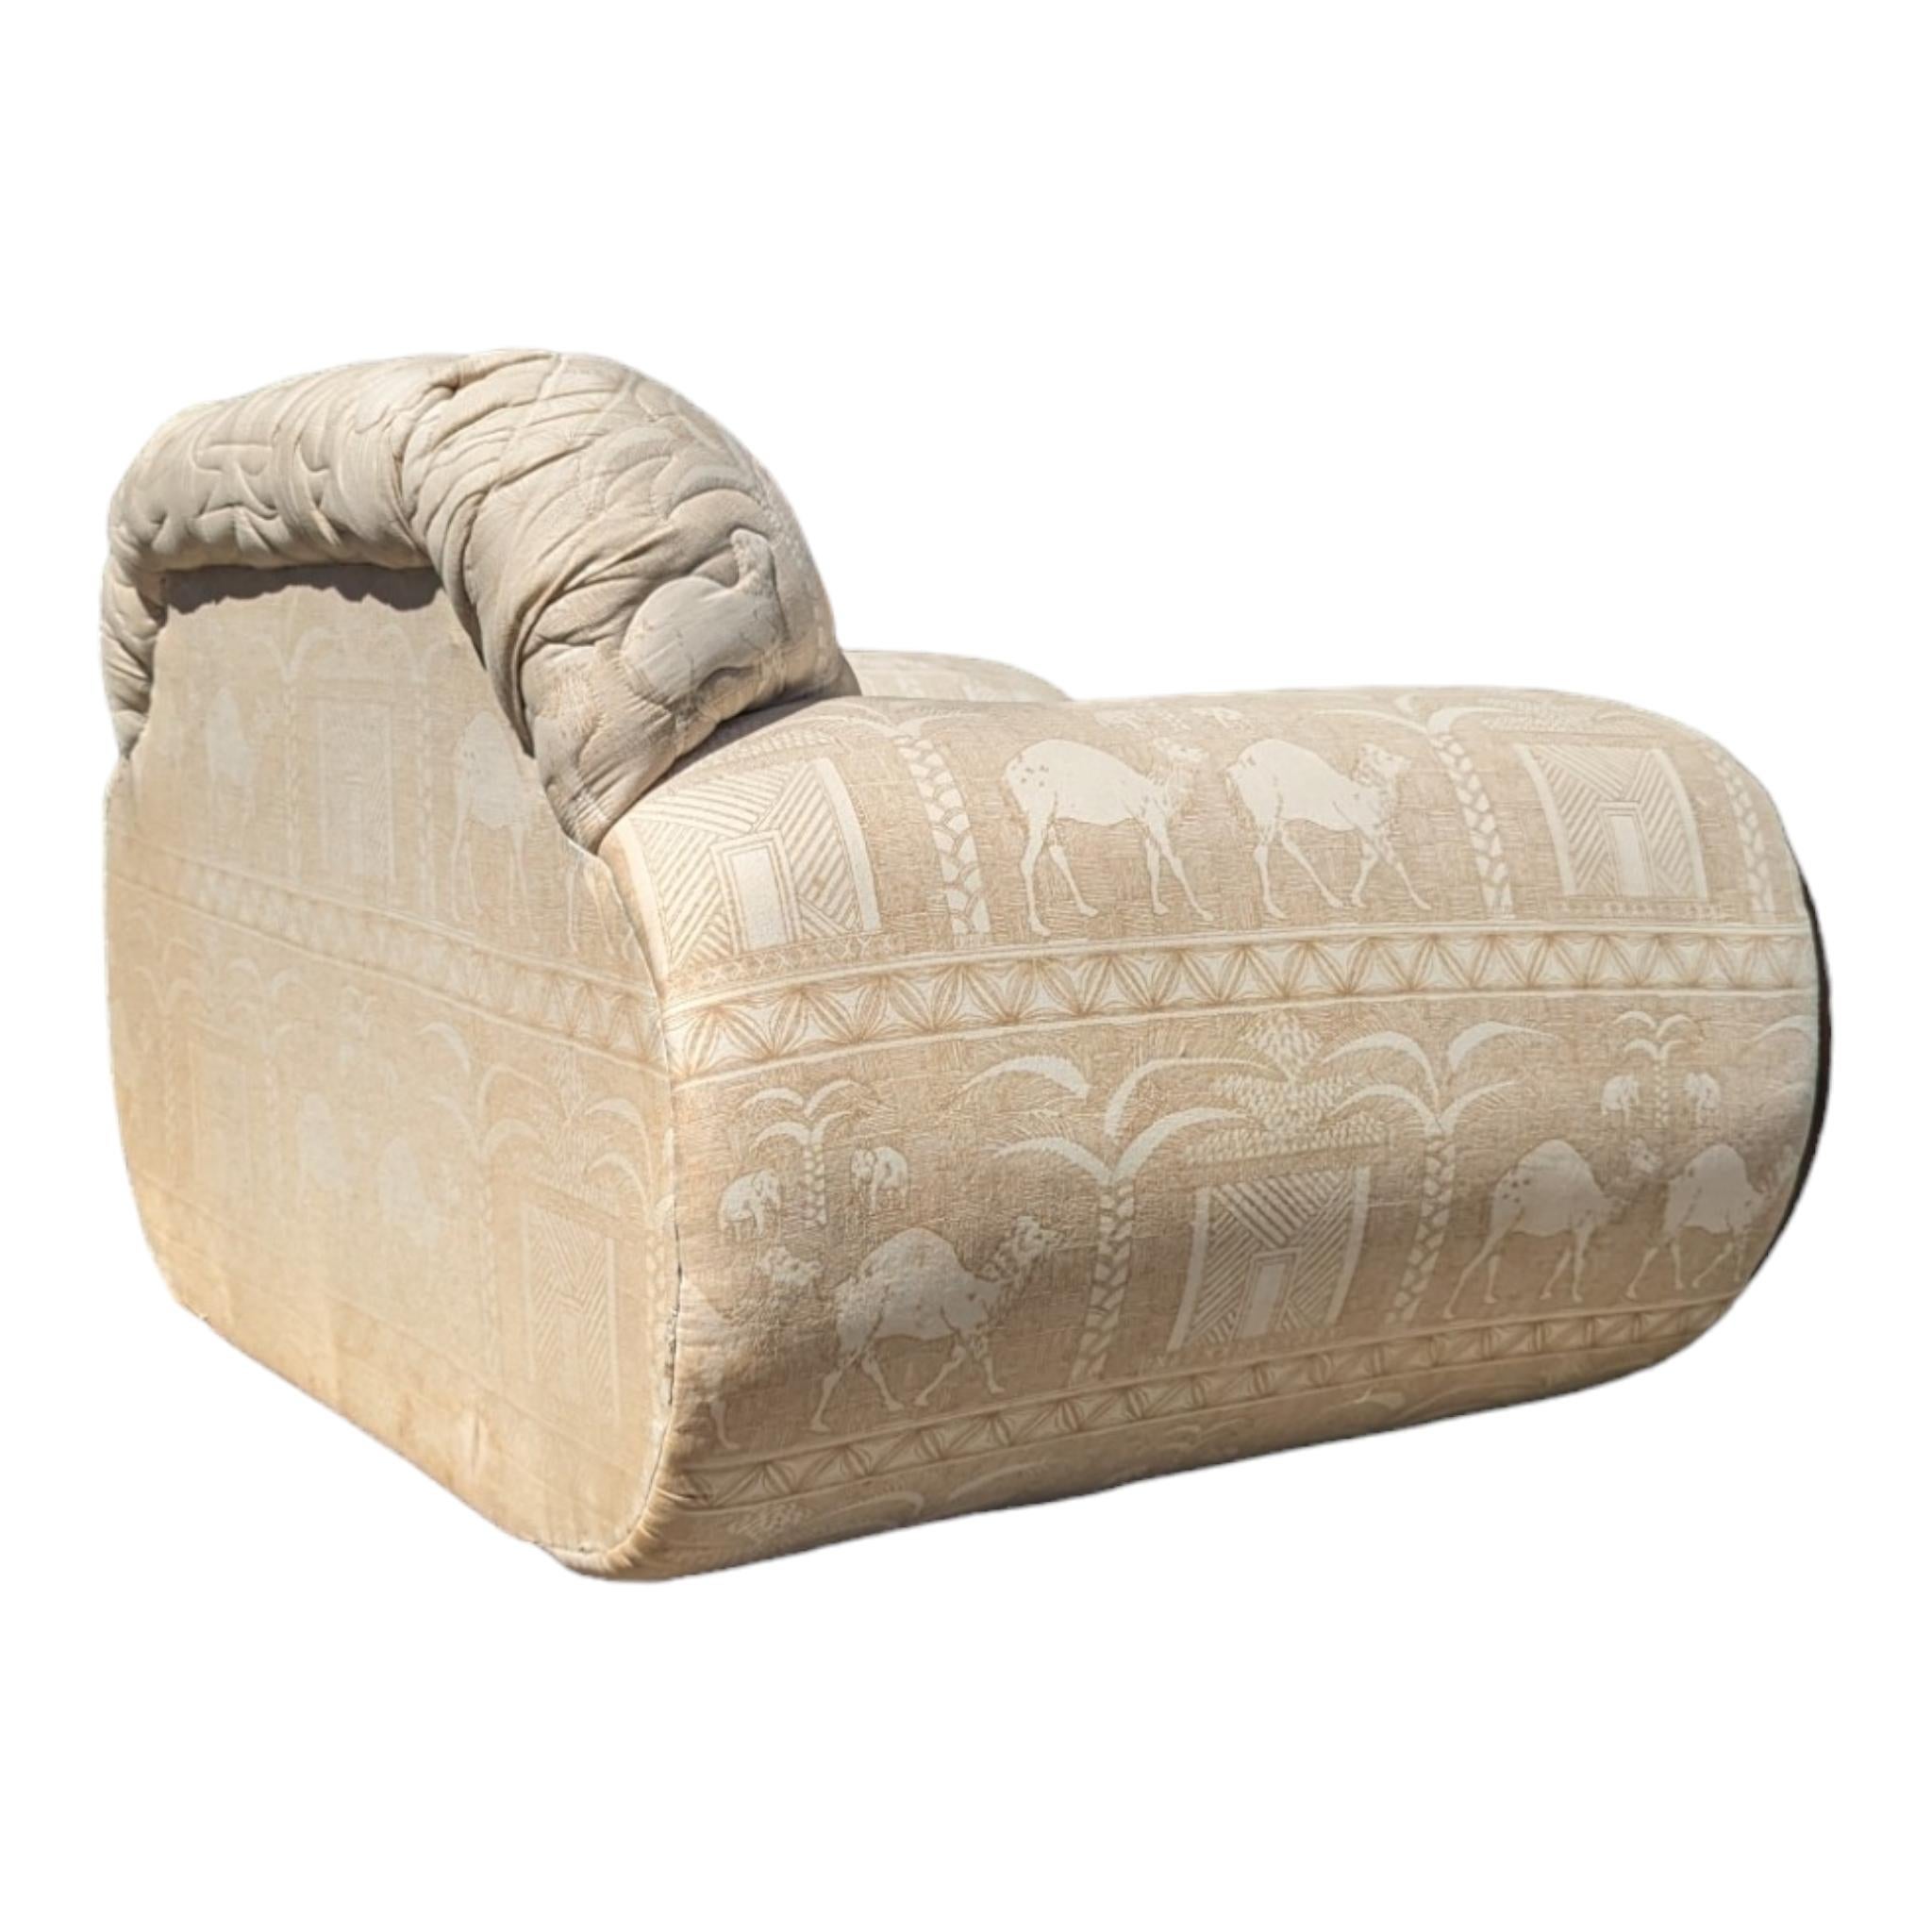 Product Description Full:
In the style of Vivai del sud club chair (TBC - we suspect it is an an original however to be safe we are listing it as style). Upholstered professionally by Schweiger home furnishings in a lovely desert print with expertly